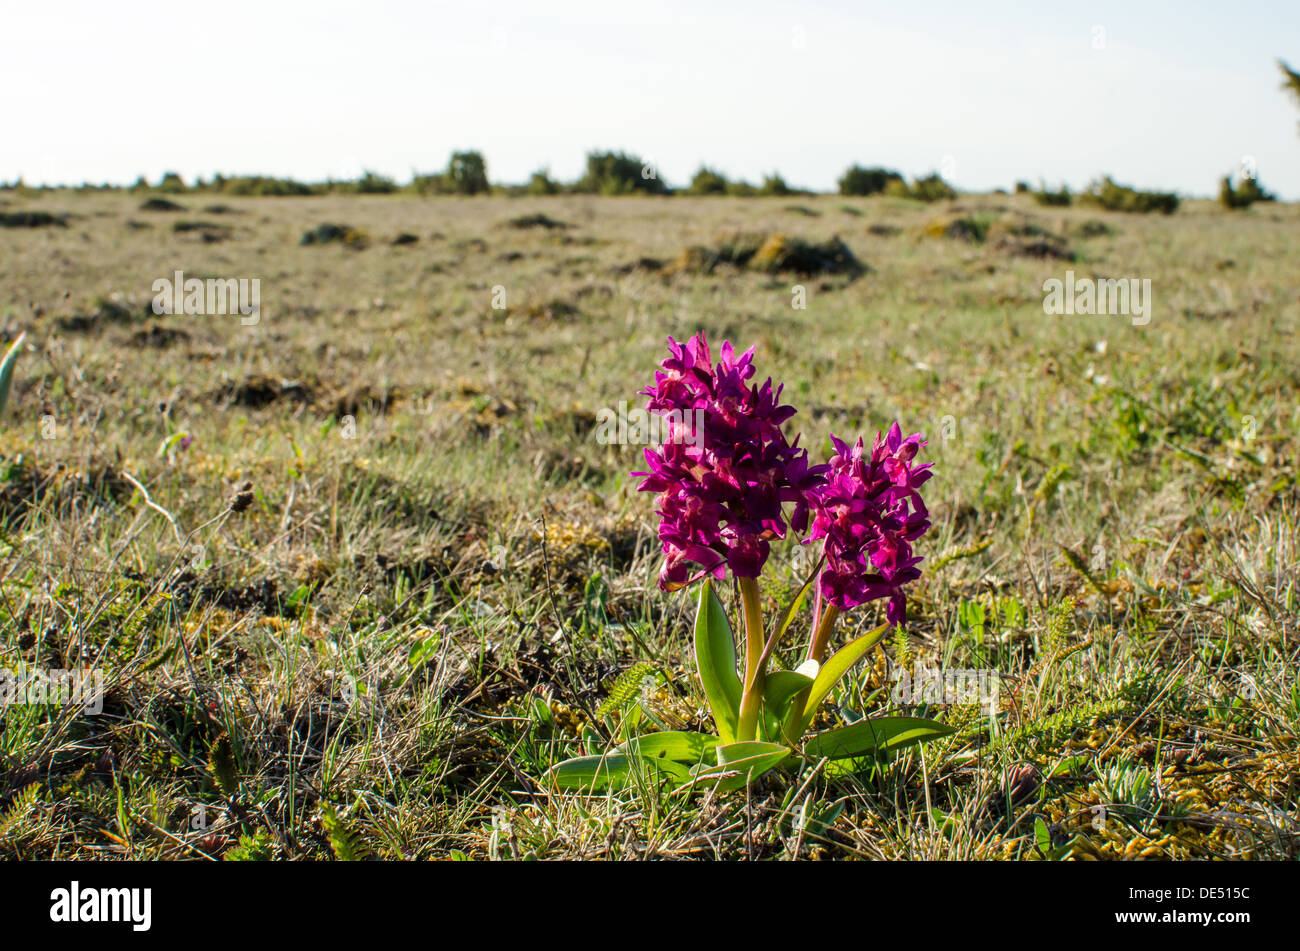 Blossom wild flowers at a plain grassland on the island Oland in Sweden. Stock Photo